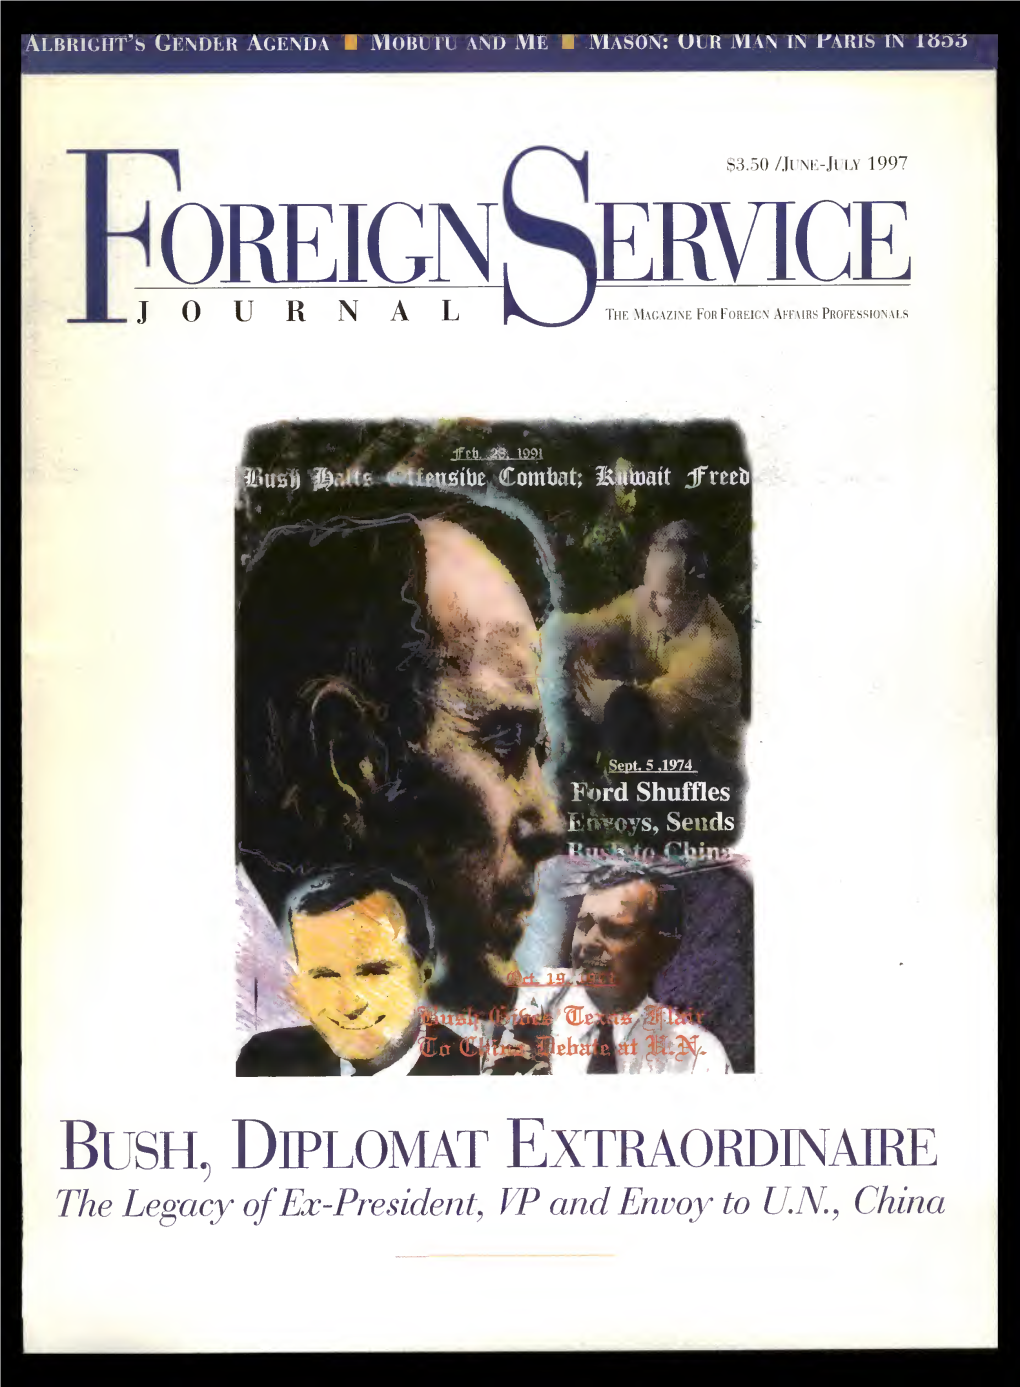 The Foreign Service Journal, June-July 1997